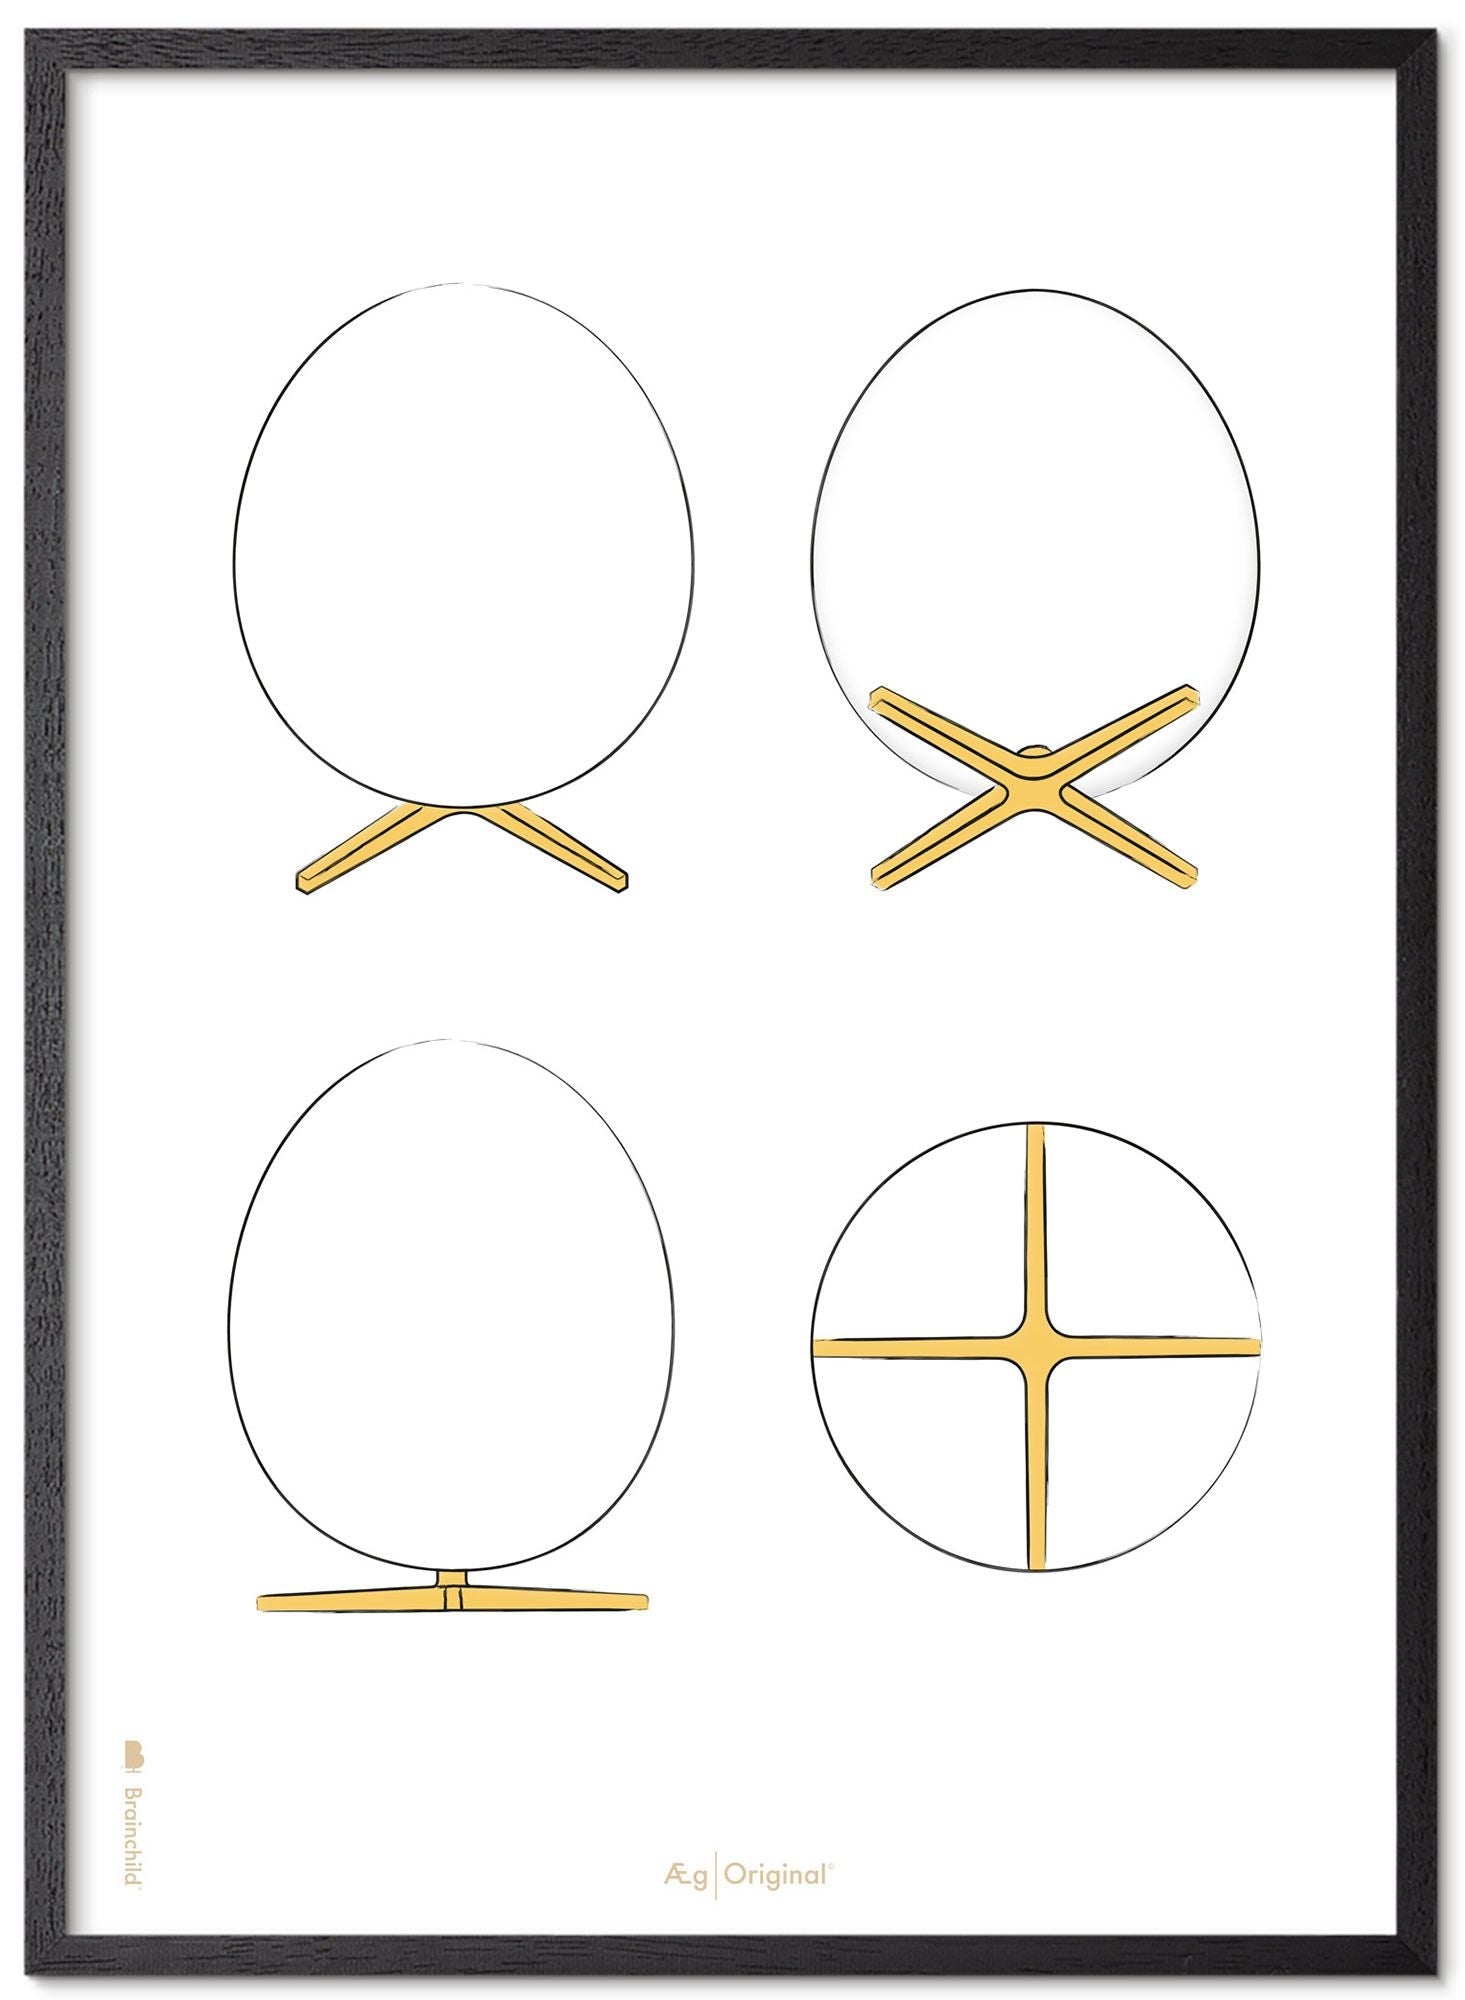 Brainchild The Egg Design Sketches Poster Frame Made Of Black Lacquered Wood 30x40 Cm, White Background